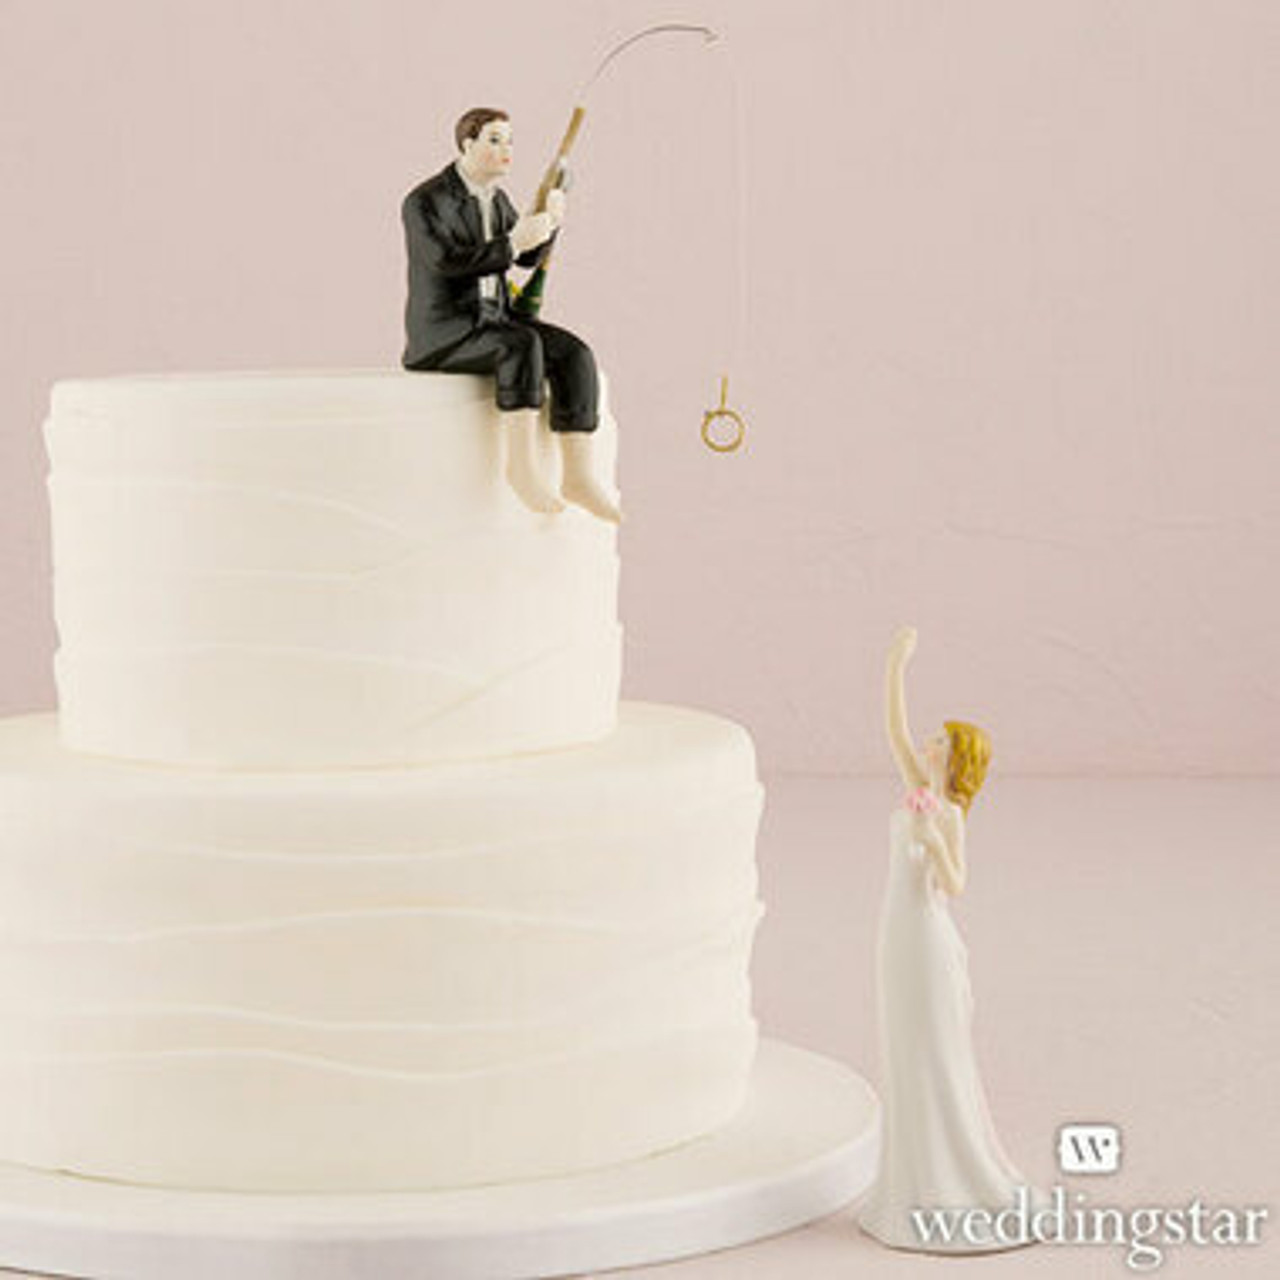 Happily Ever After Wedding Or Grooms Cake Topper - With Fishing Rod And  Shotgun. Comes With Stand And Cake Stakes #2434708